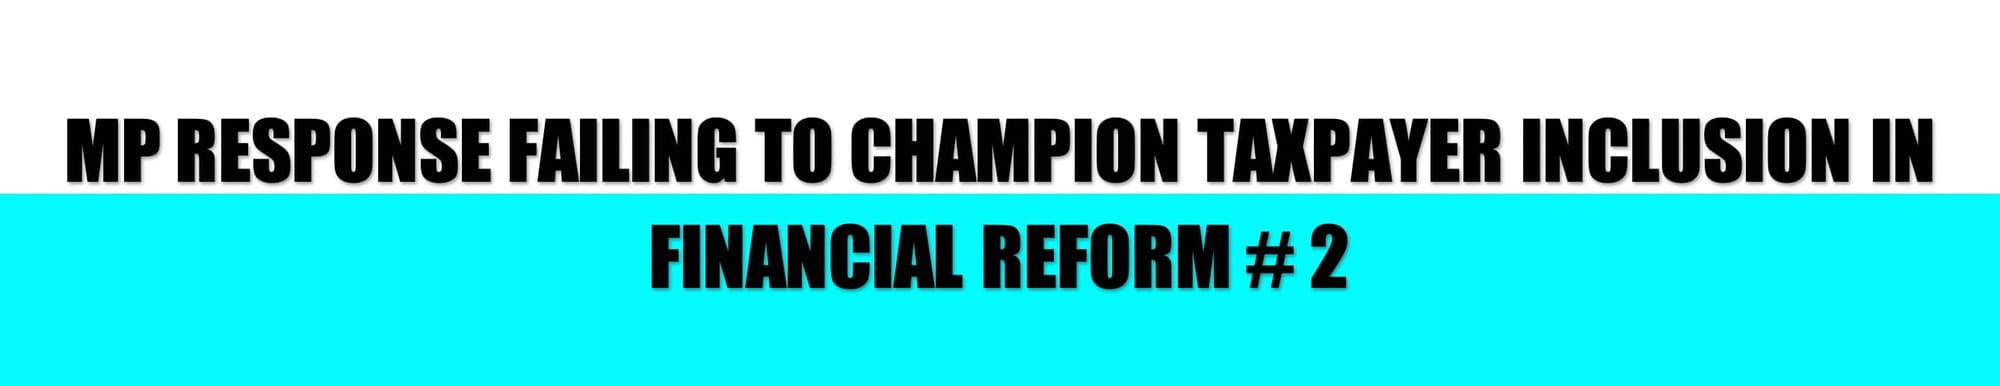 HEADER: MP RESPONSE FAILING TO CHAMPION TAXPAYER INCLUSION IN FINANCIAL REFORM